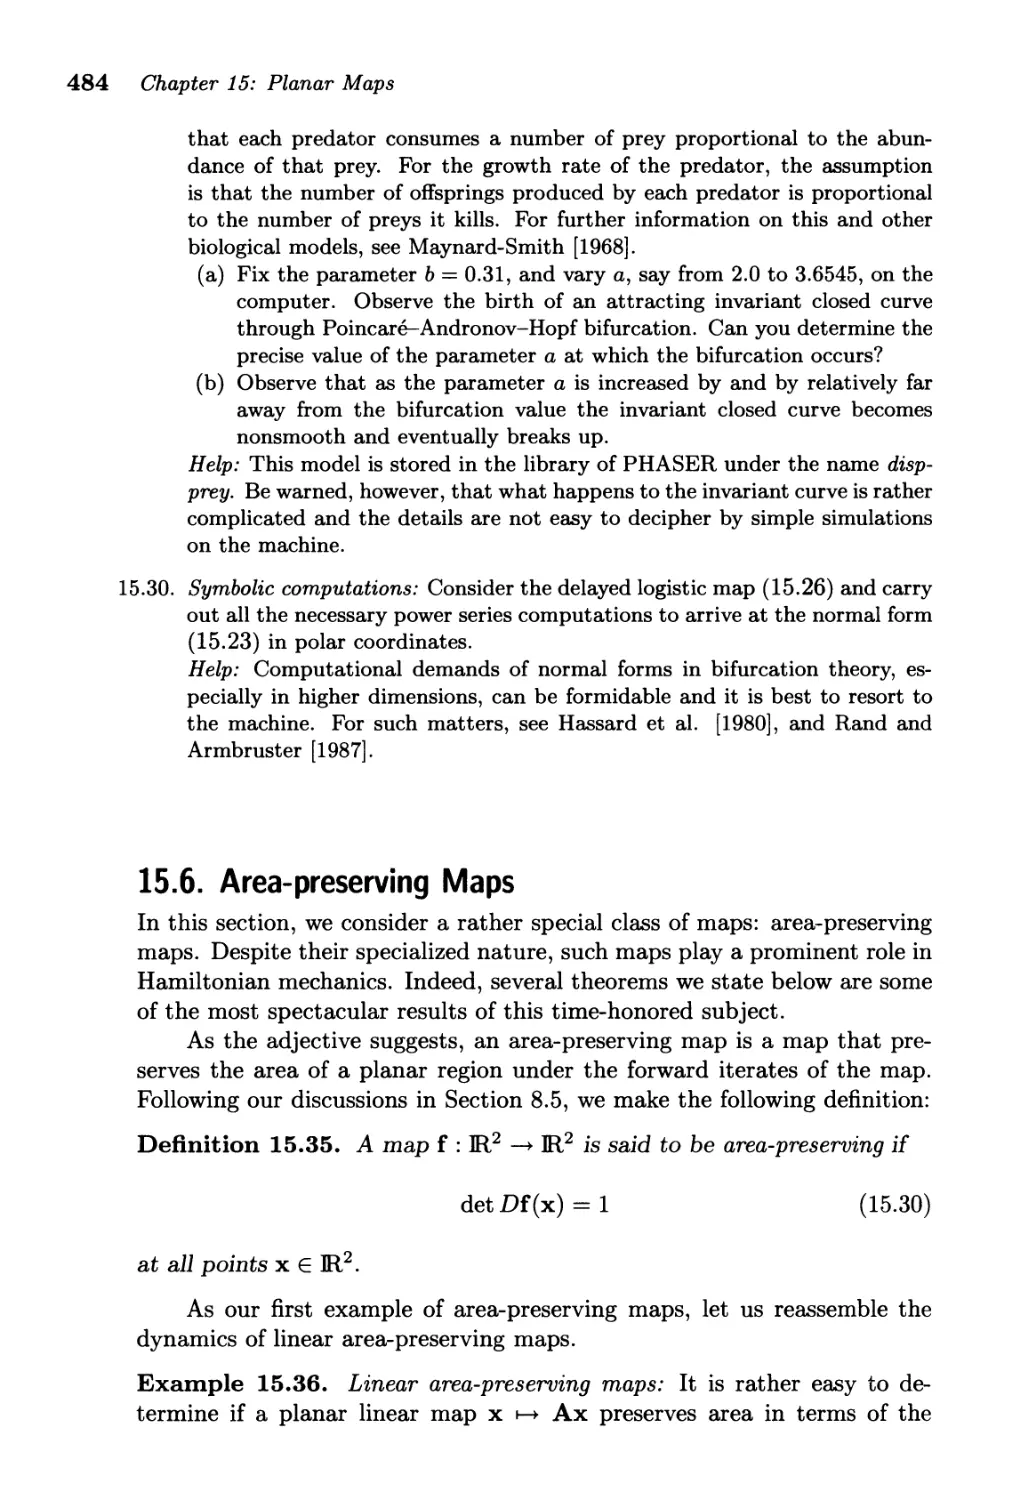 15.6. Area-preserving Maps